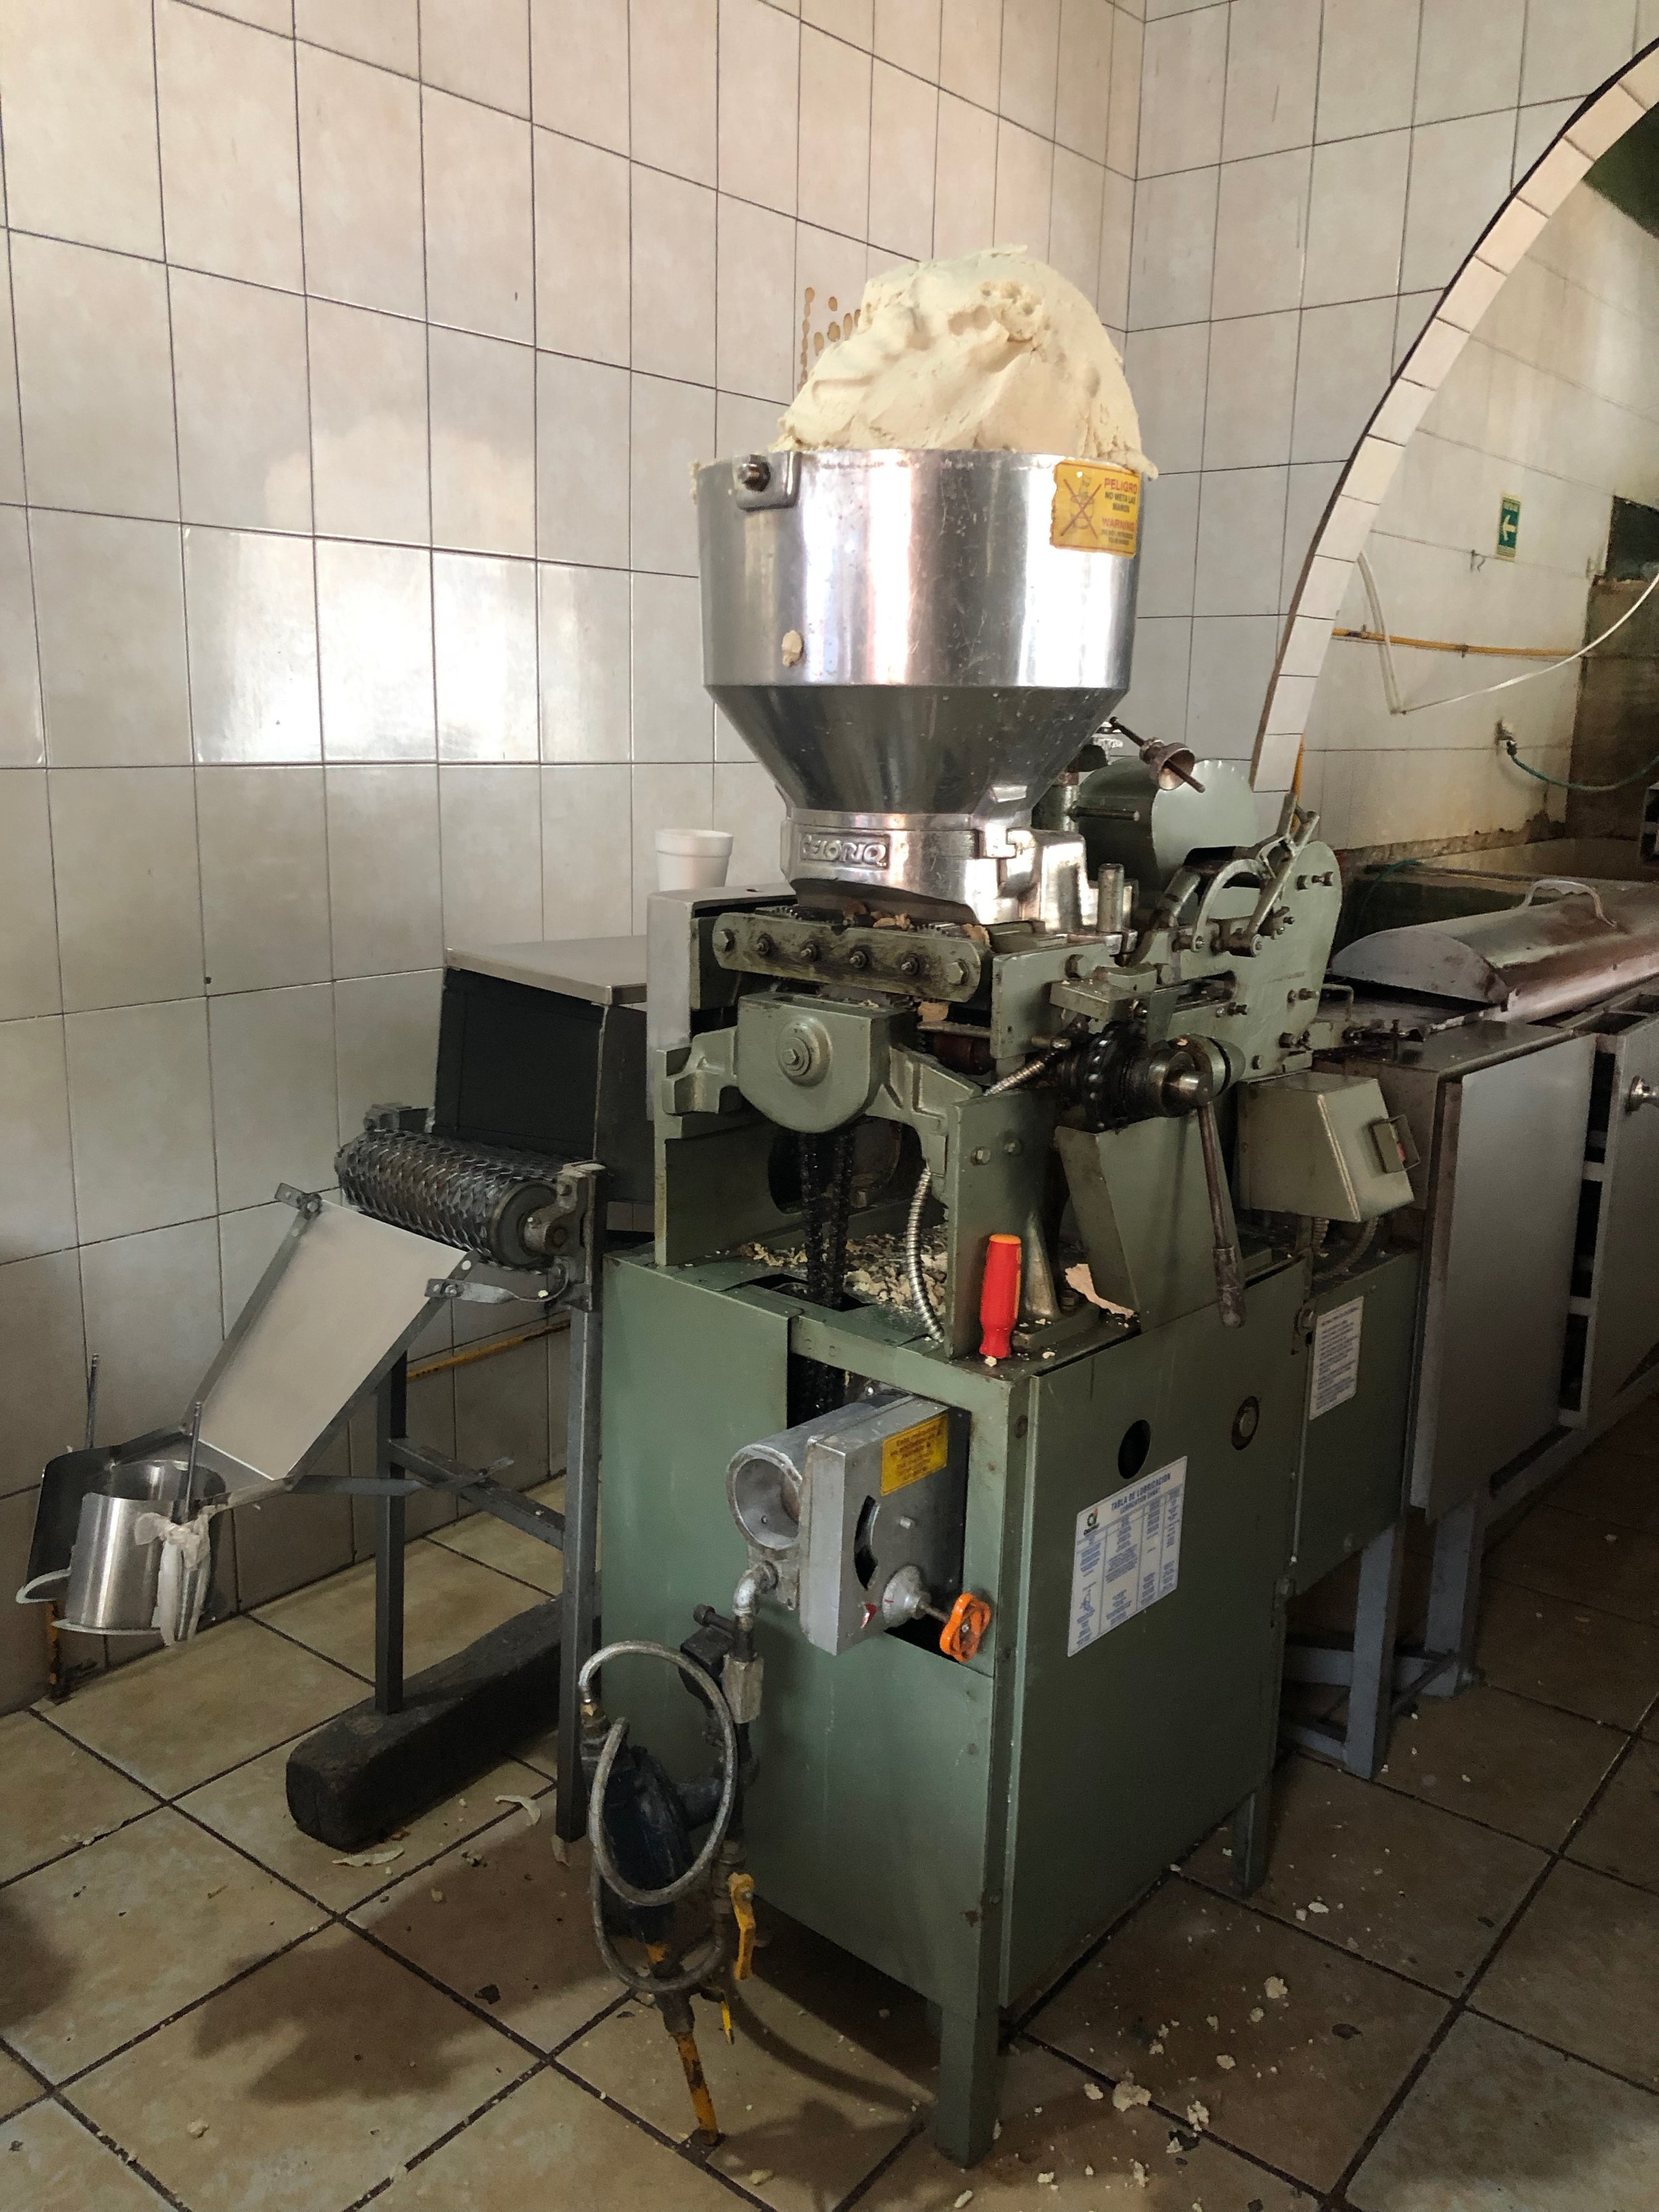 This machine processes the masa and makes tortillas